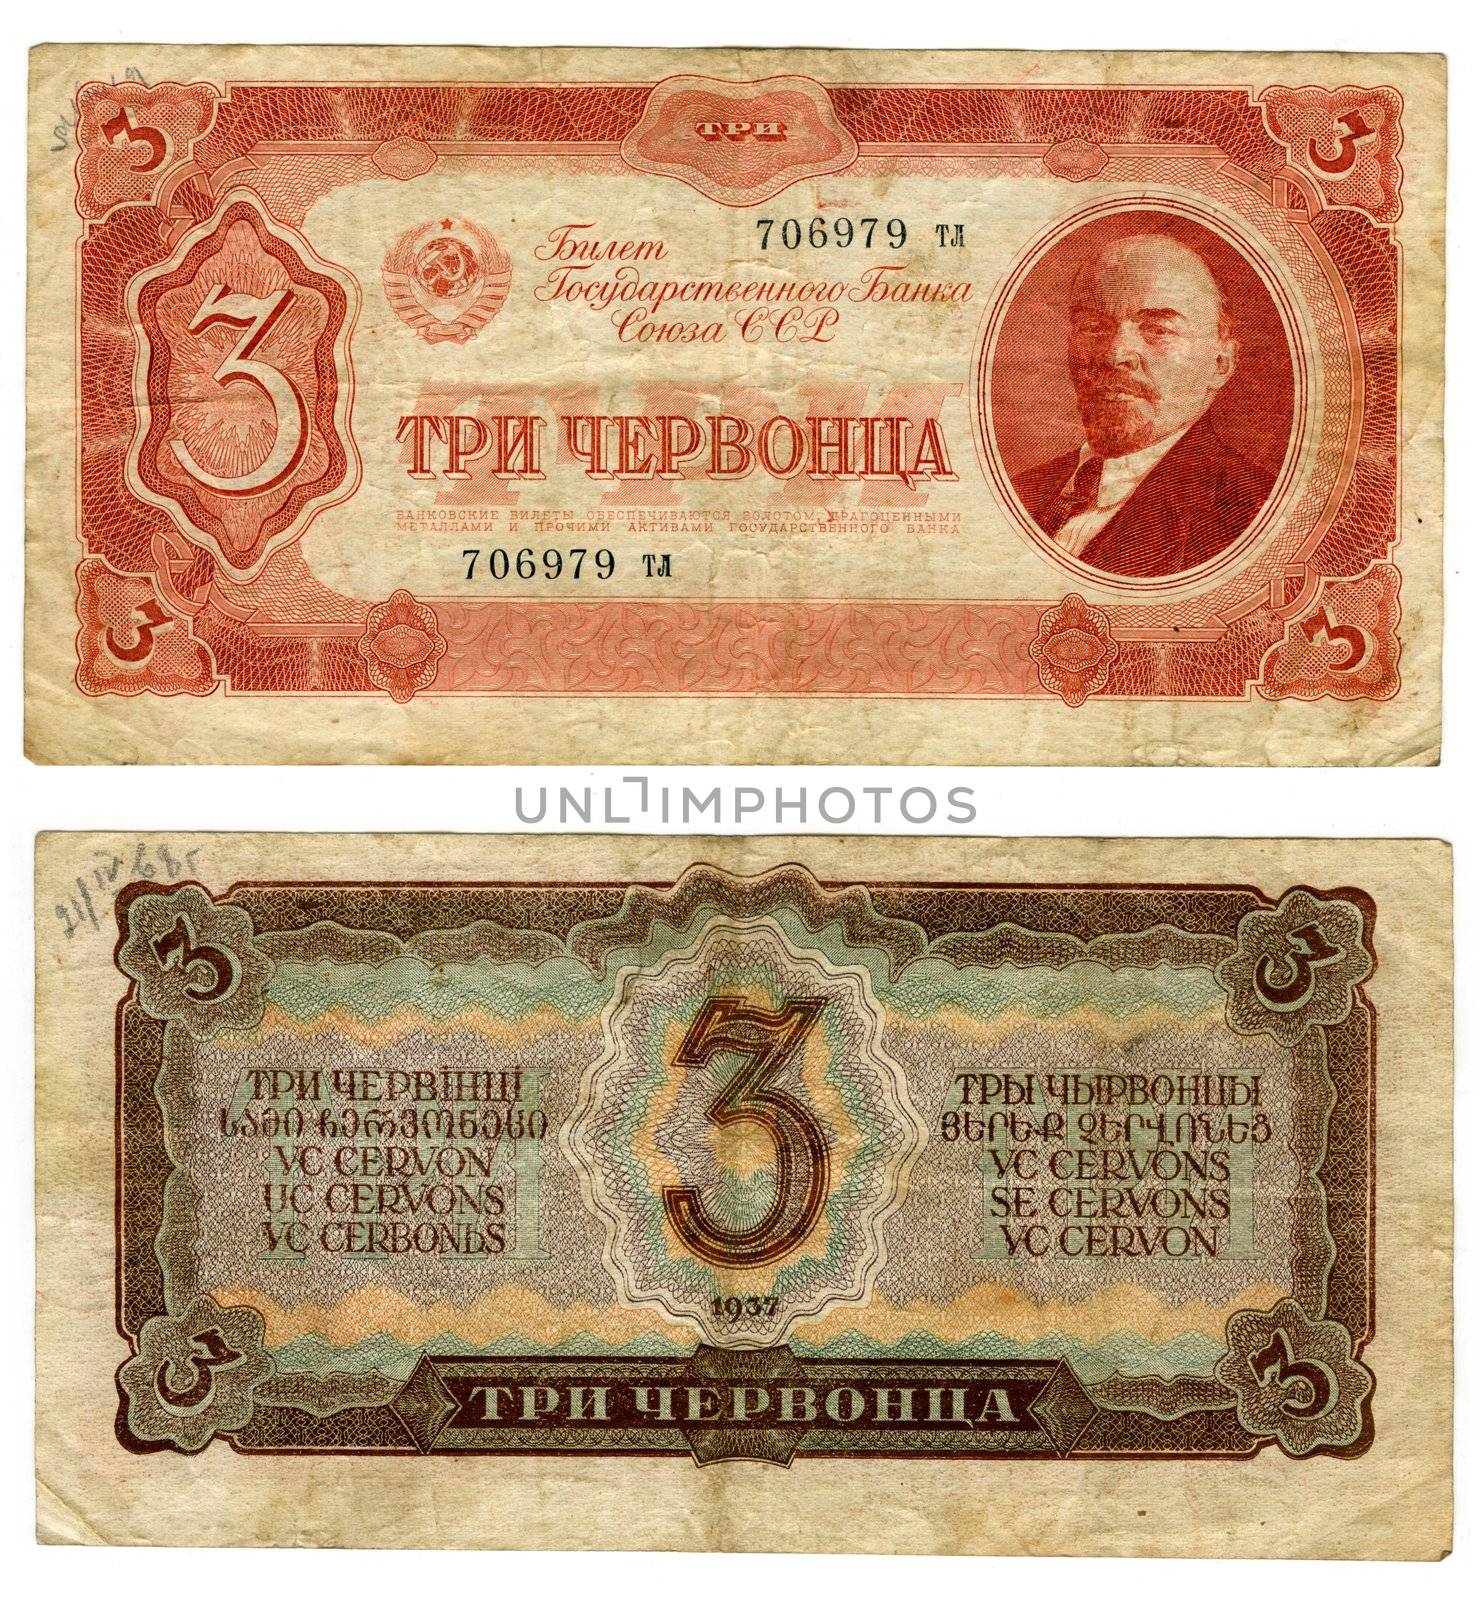 30 old Soviet rubles (obverse and reverse) by skutin